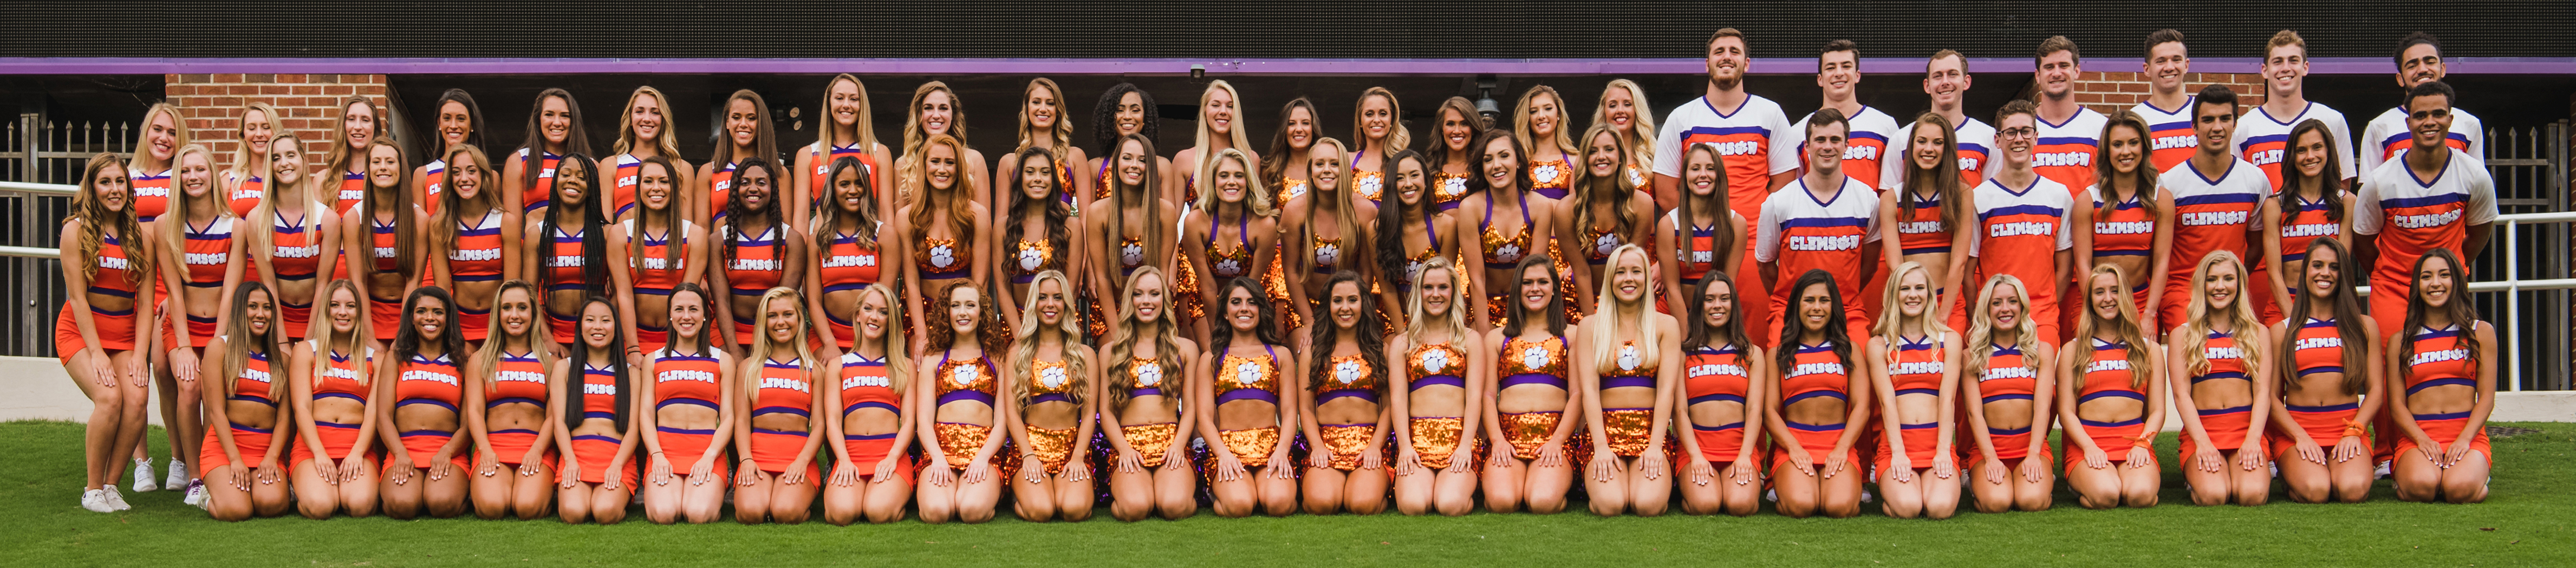 The 2019-2020 Clemson Cheerleaders and Rally Cats.
